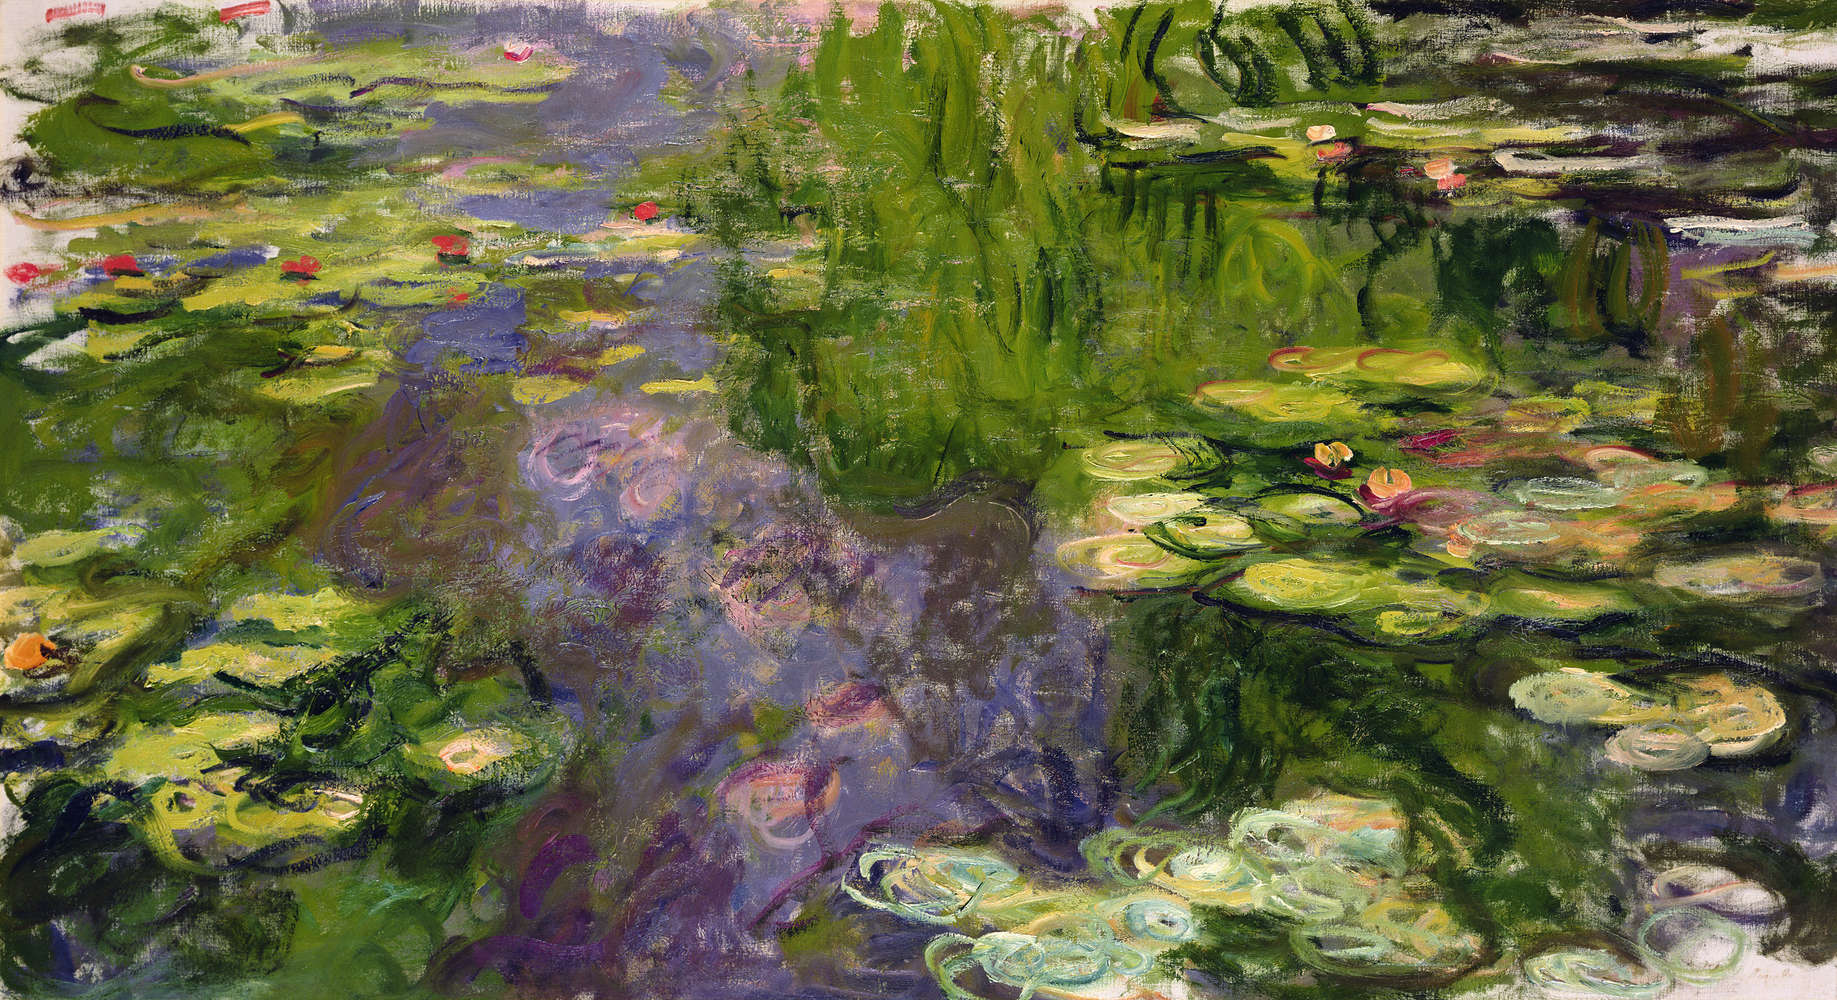             Photo wallpaper "Water Lilies" by Claude Monet
        